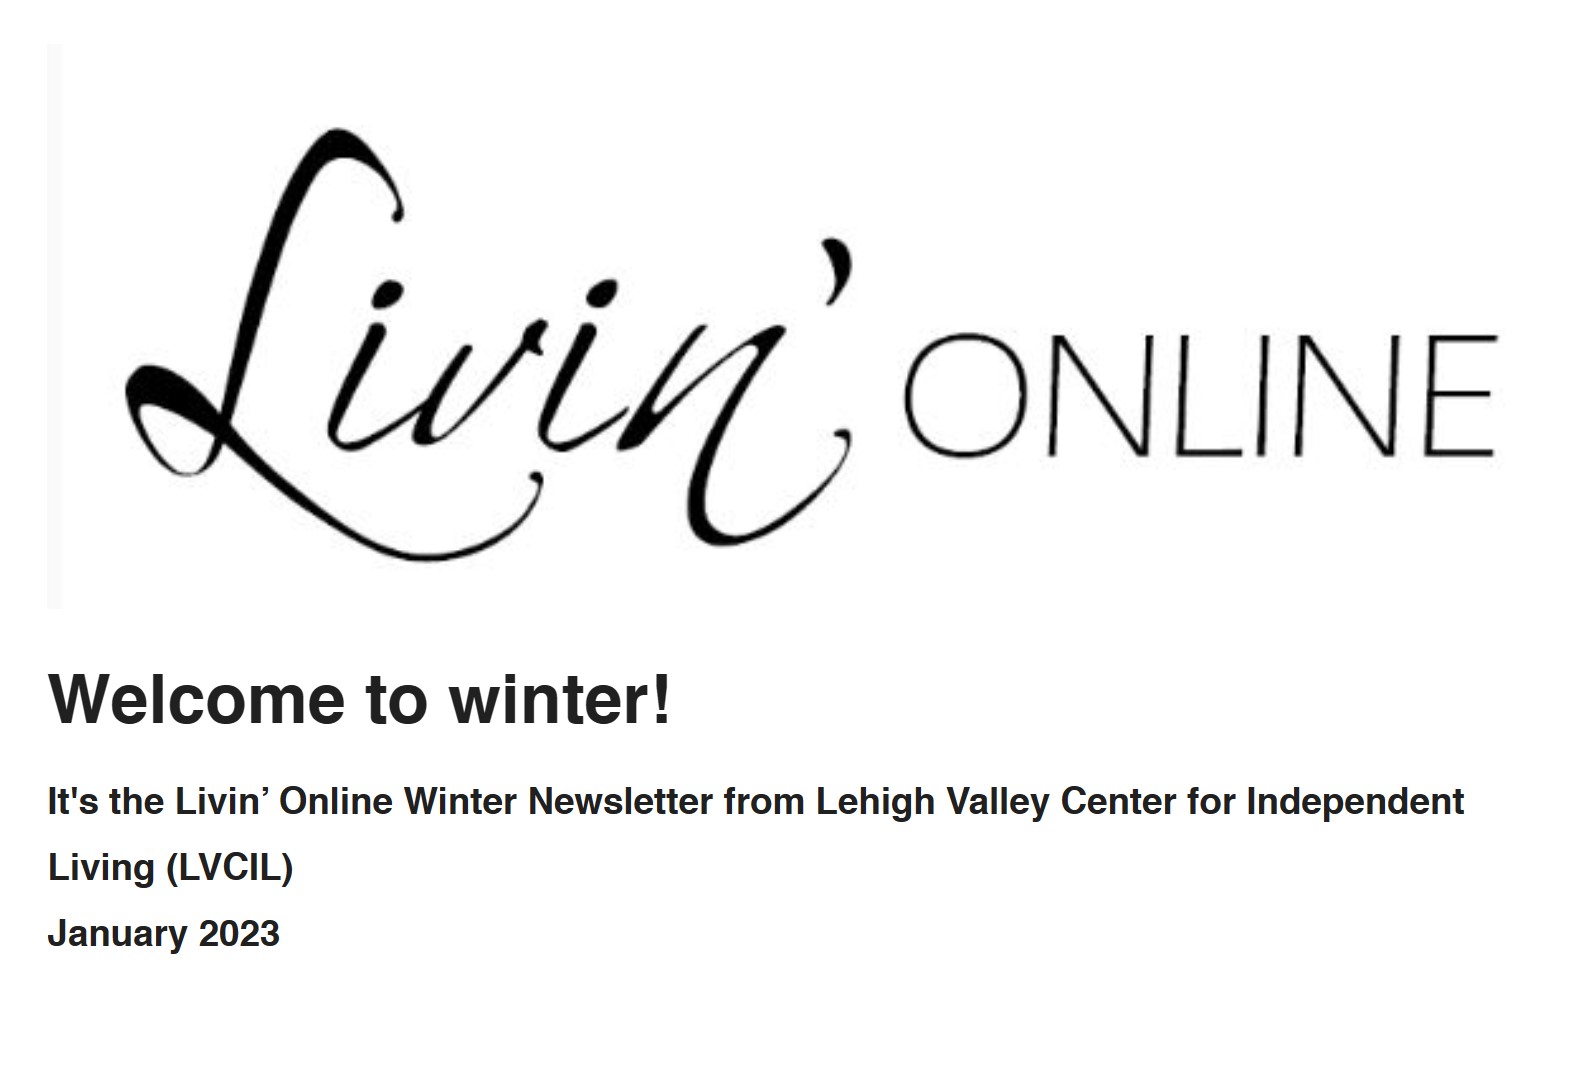 Check out our Winter edition of the Livin’ Online winter newsletter